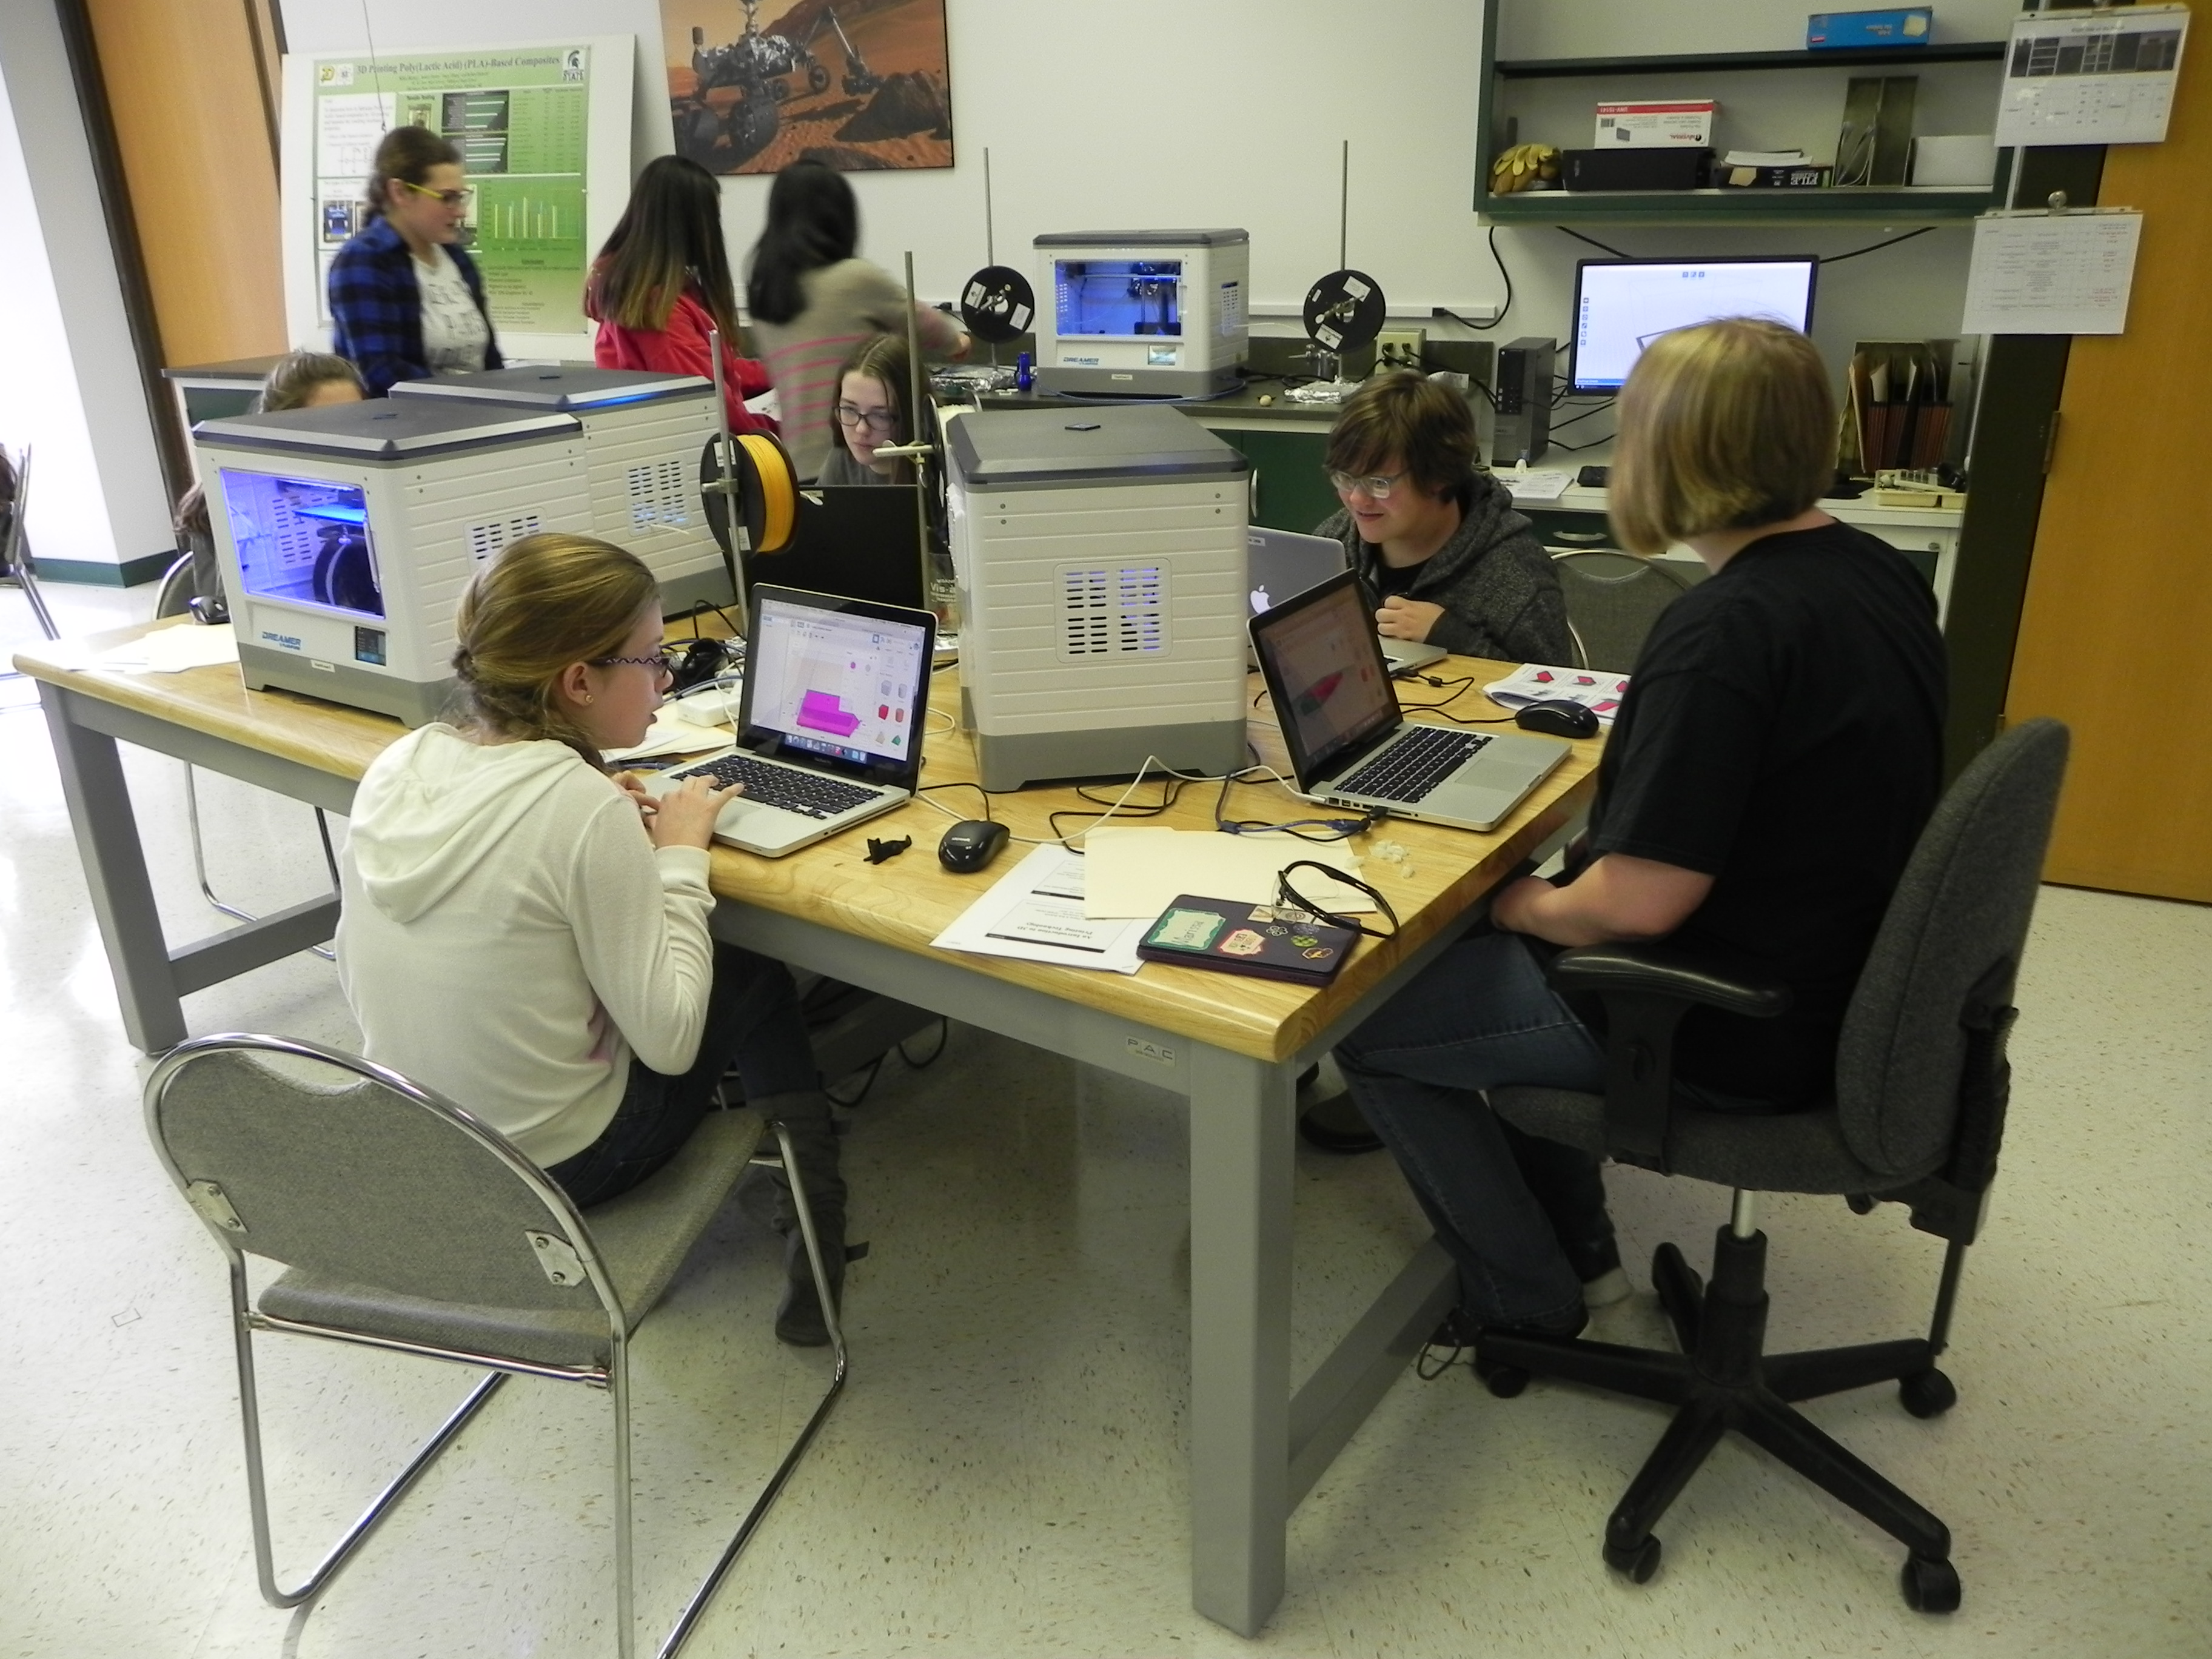 Group of students working in 3D printing lab